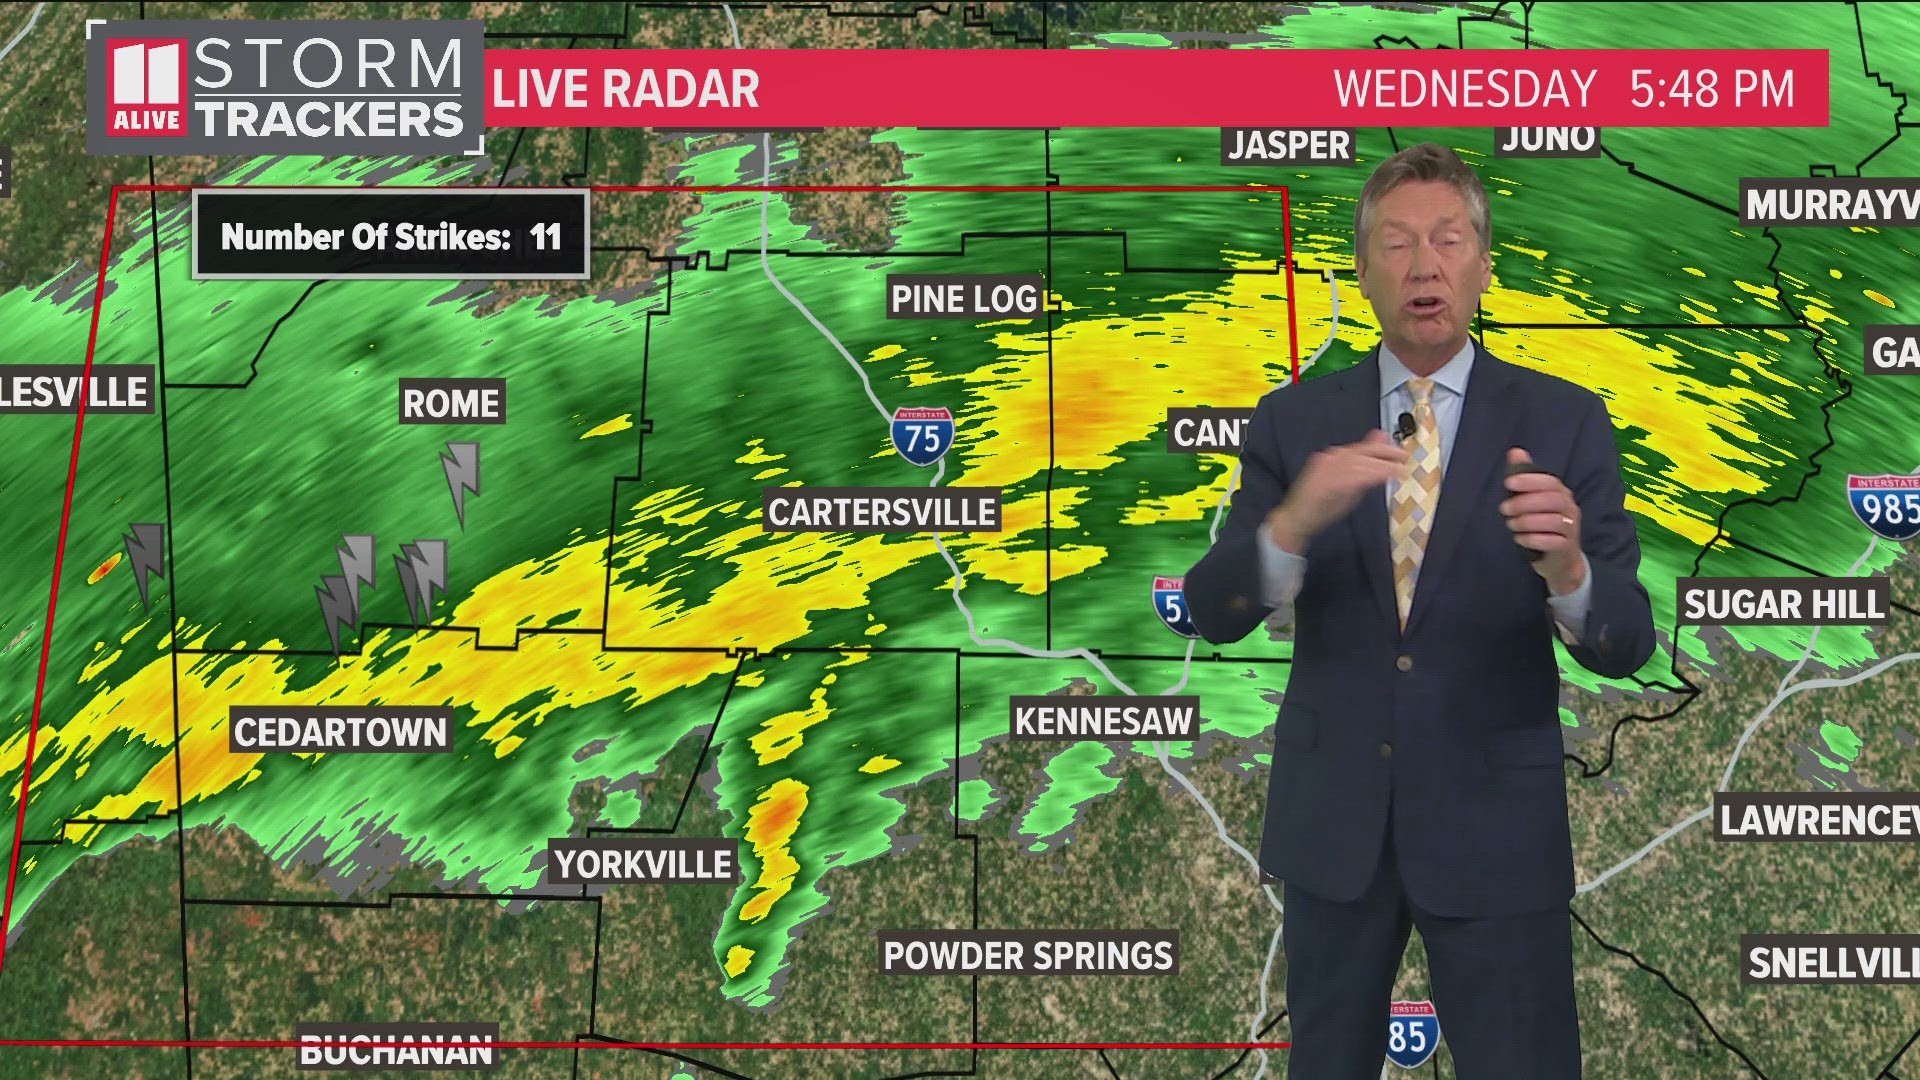 The 11Alive StormTrackers are tracking the next rain system moving our way. Here's the latest on your forecast.